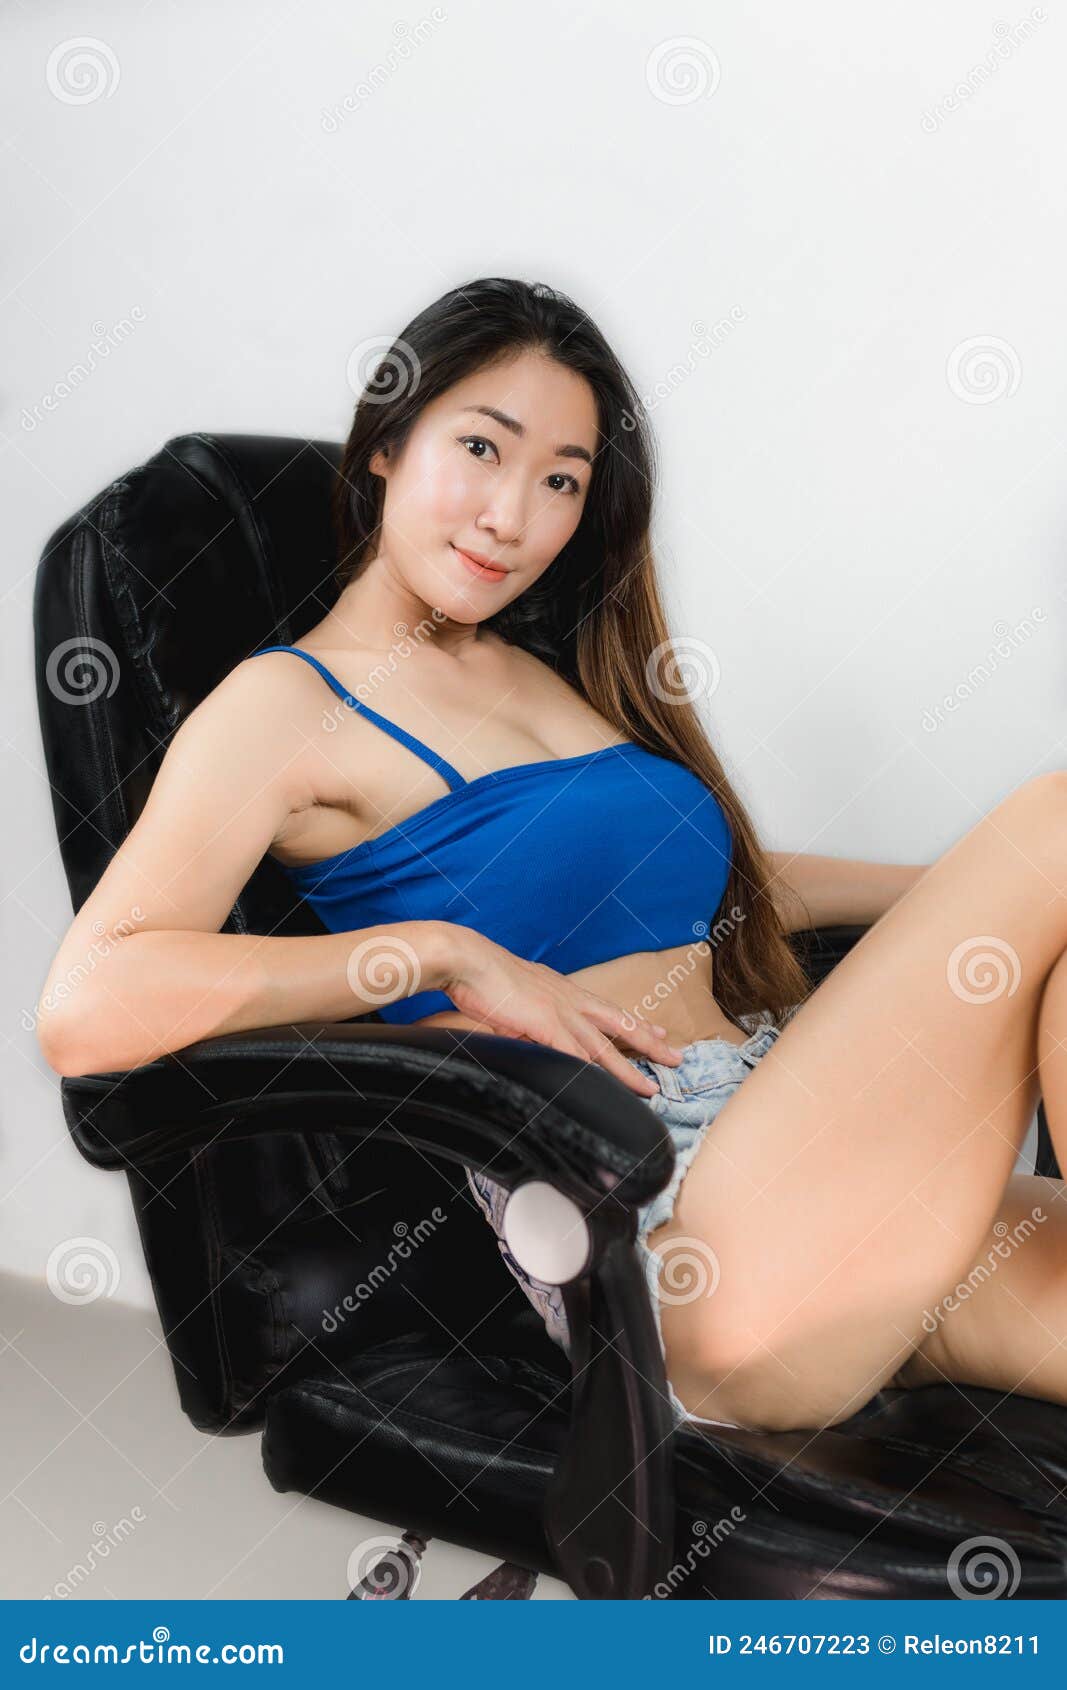 Asian Women Wearing a Blue Single-breasted Dress Sitting in a Chair Stock Image